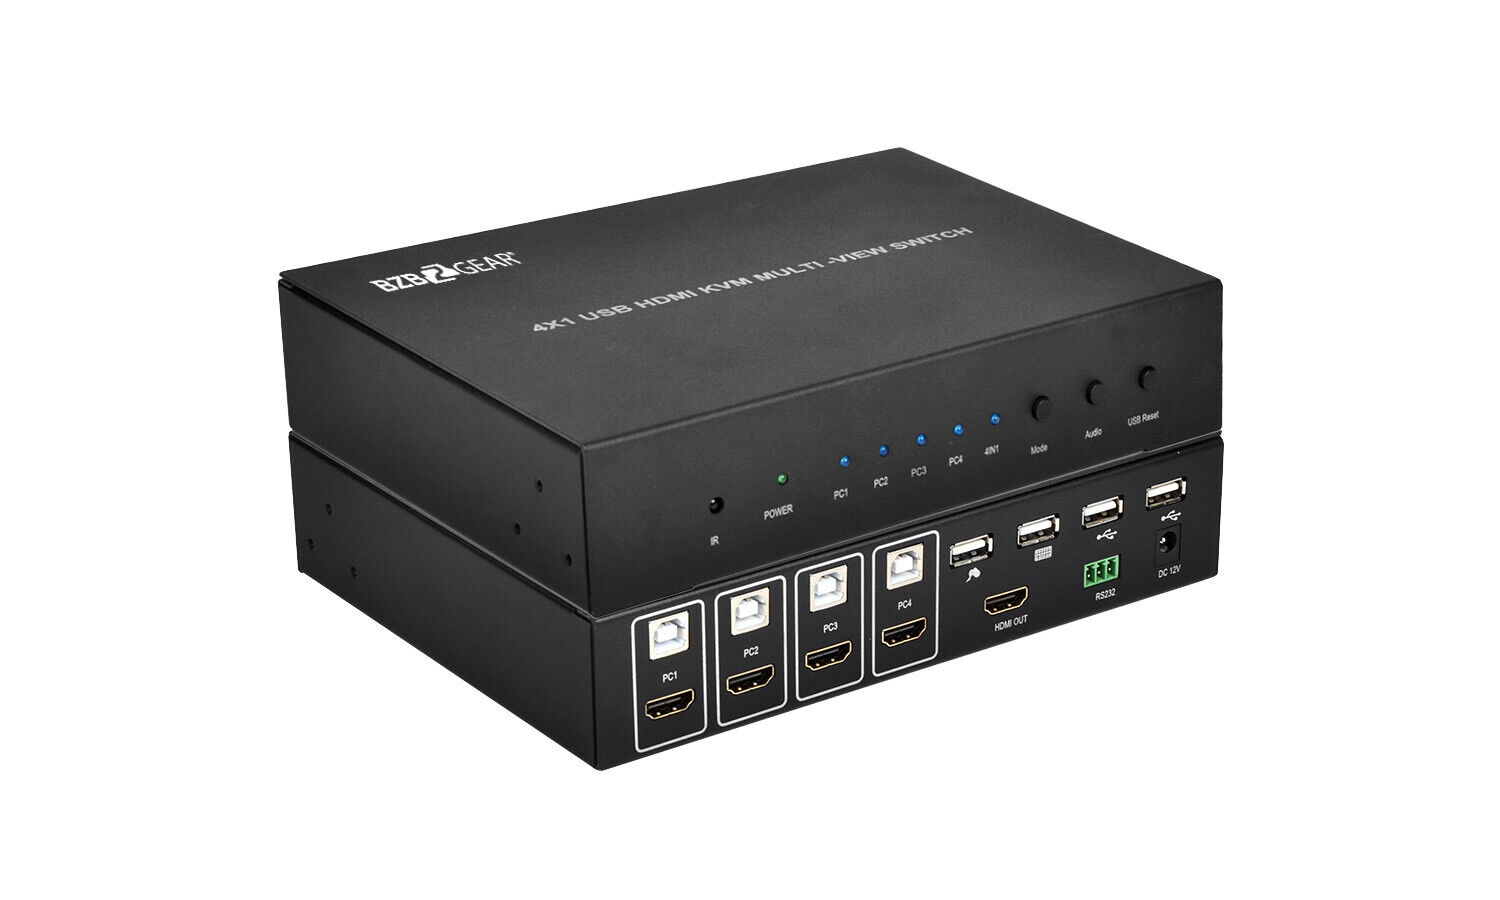 BZBGEAR 4X1 Quad MultiViewer and Roaming Mouse Seamless KVM Switcher BG-HD-MS4X1